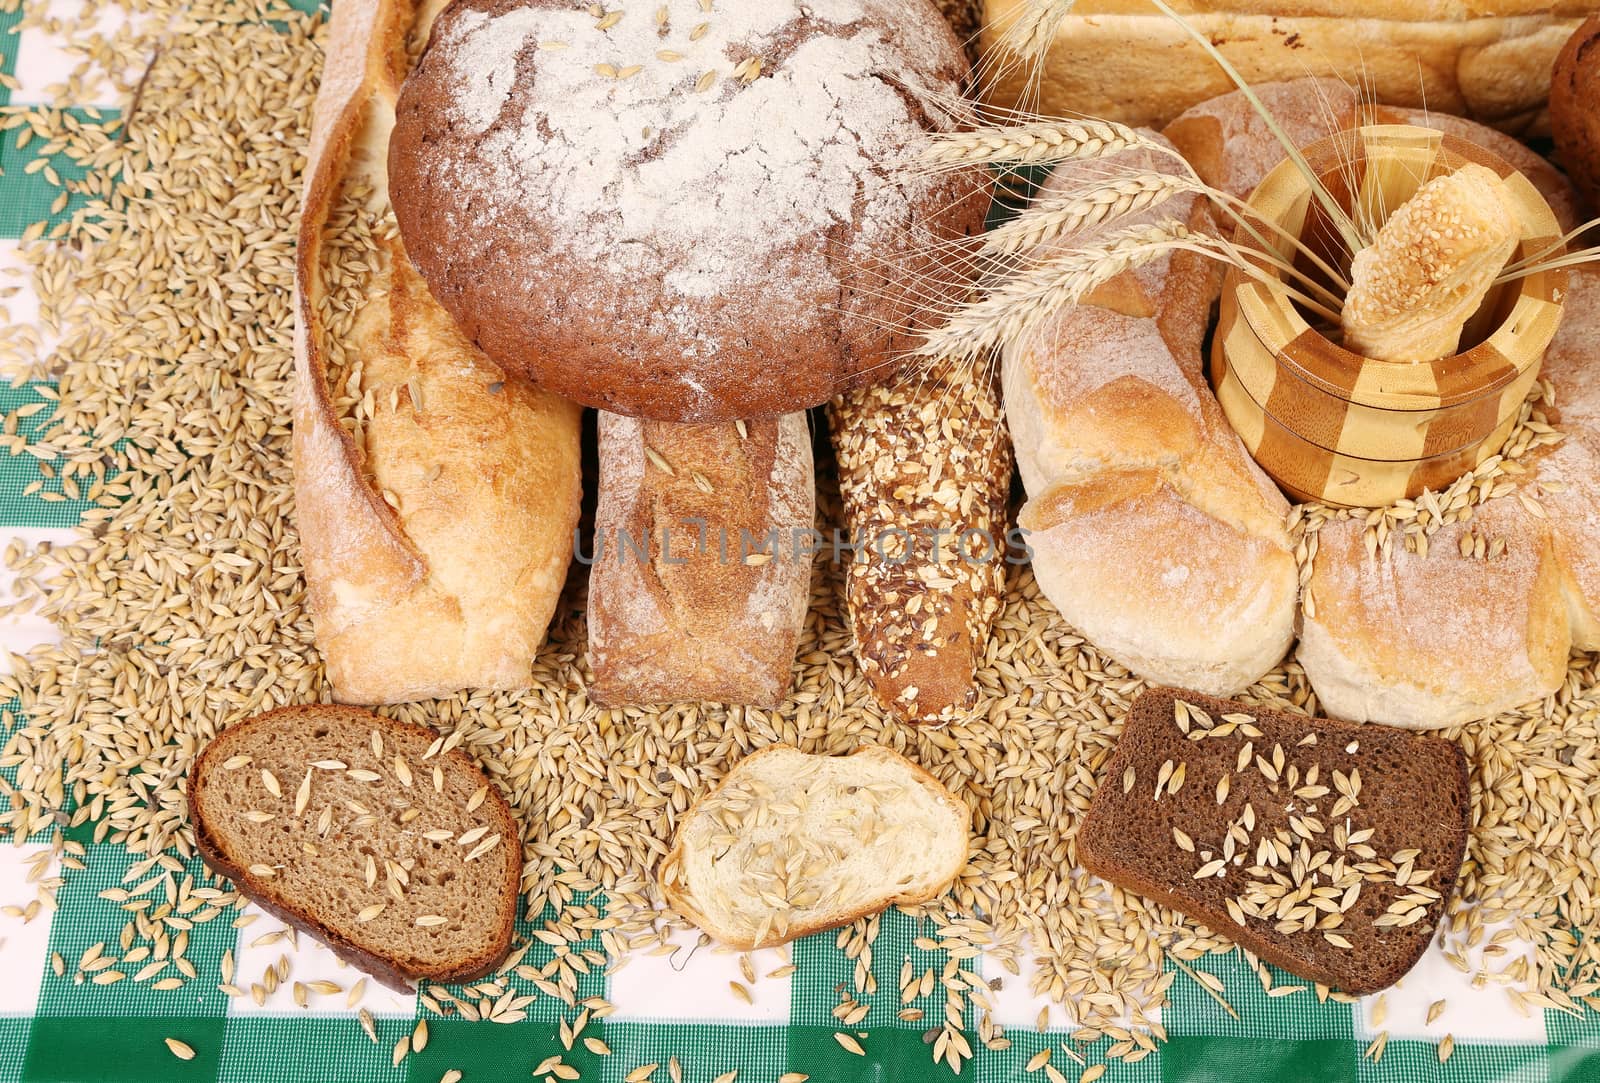 Composition of breads and wheat. To be used as background.